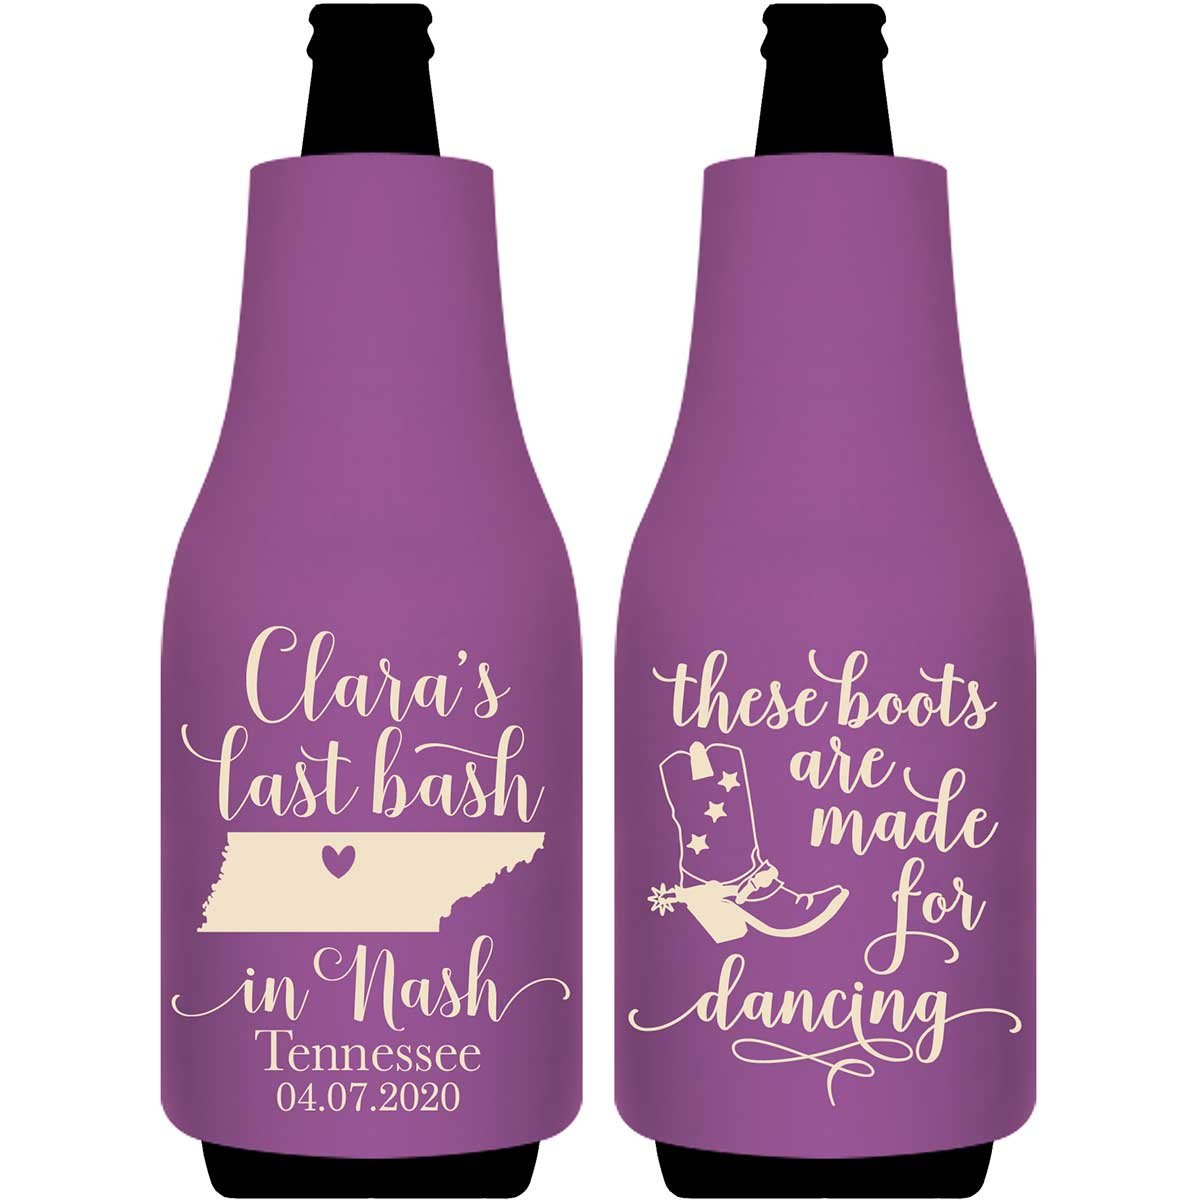 Last Bash In Nash 2A Foldable Bottle Sleeve Koozies Wedding Gifts for Guests